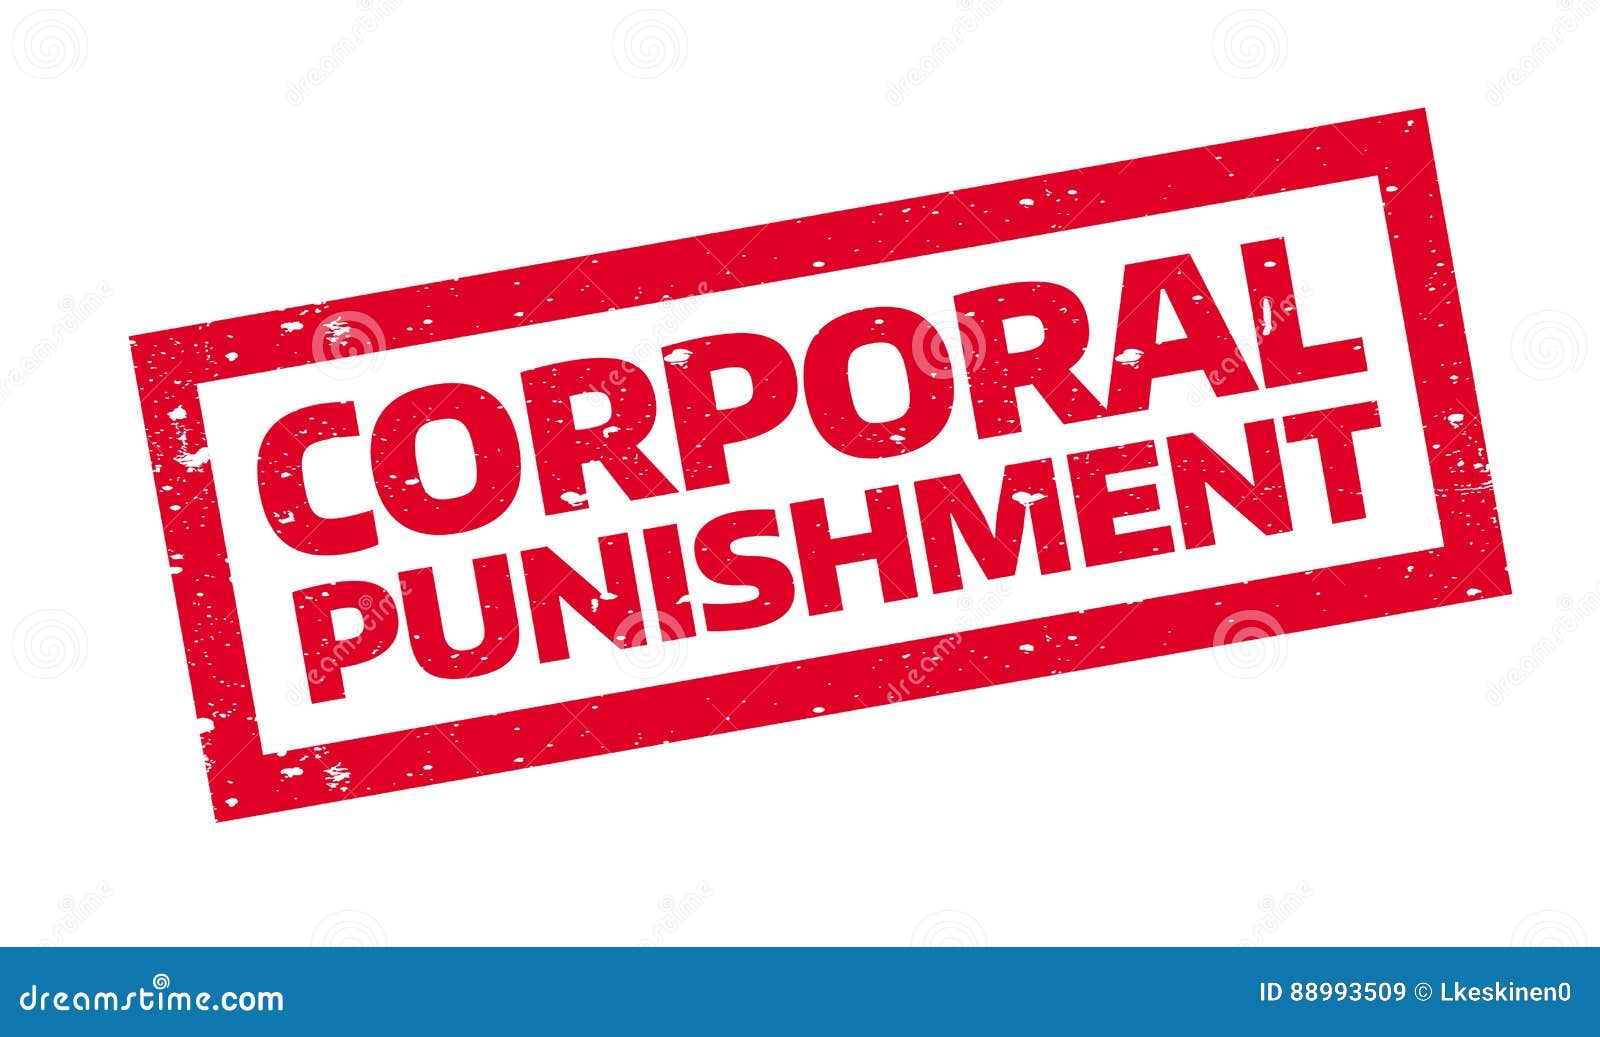 The Effects of Corporal Punishment on Children